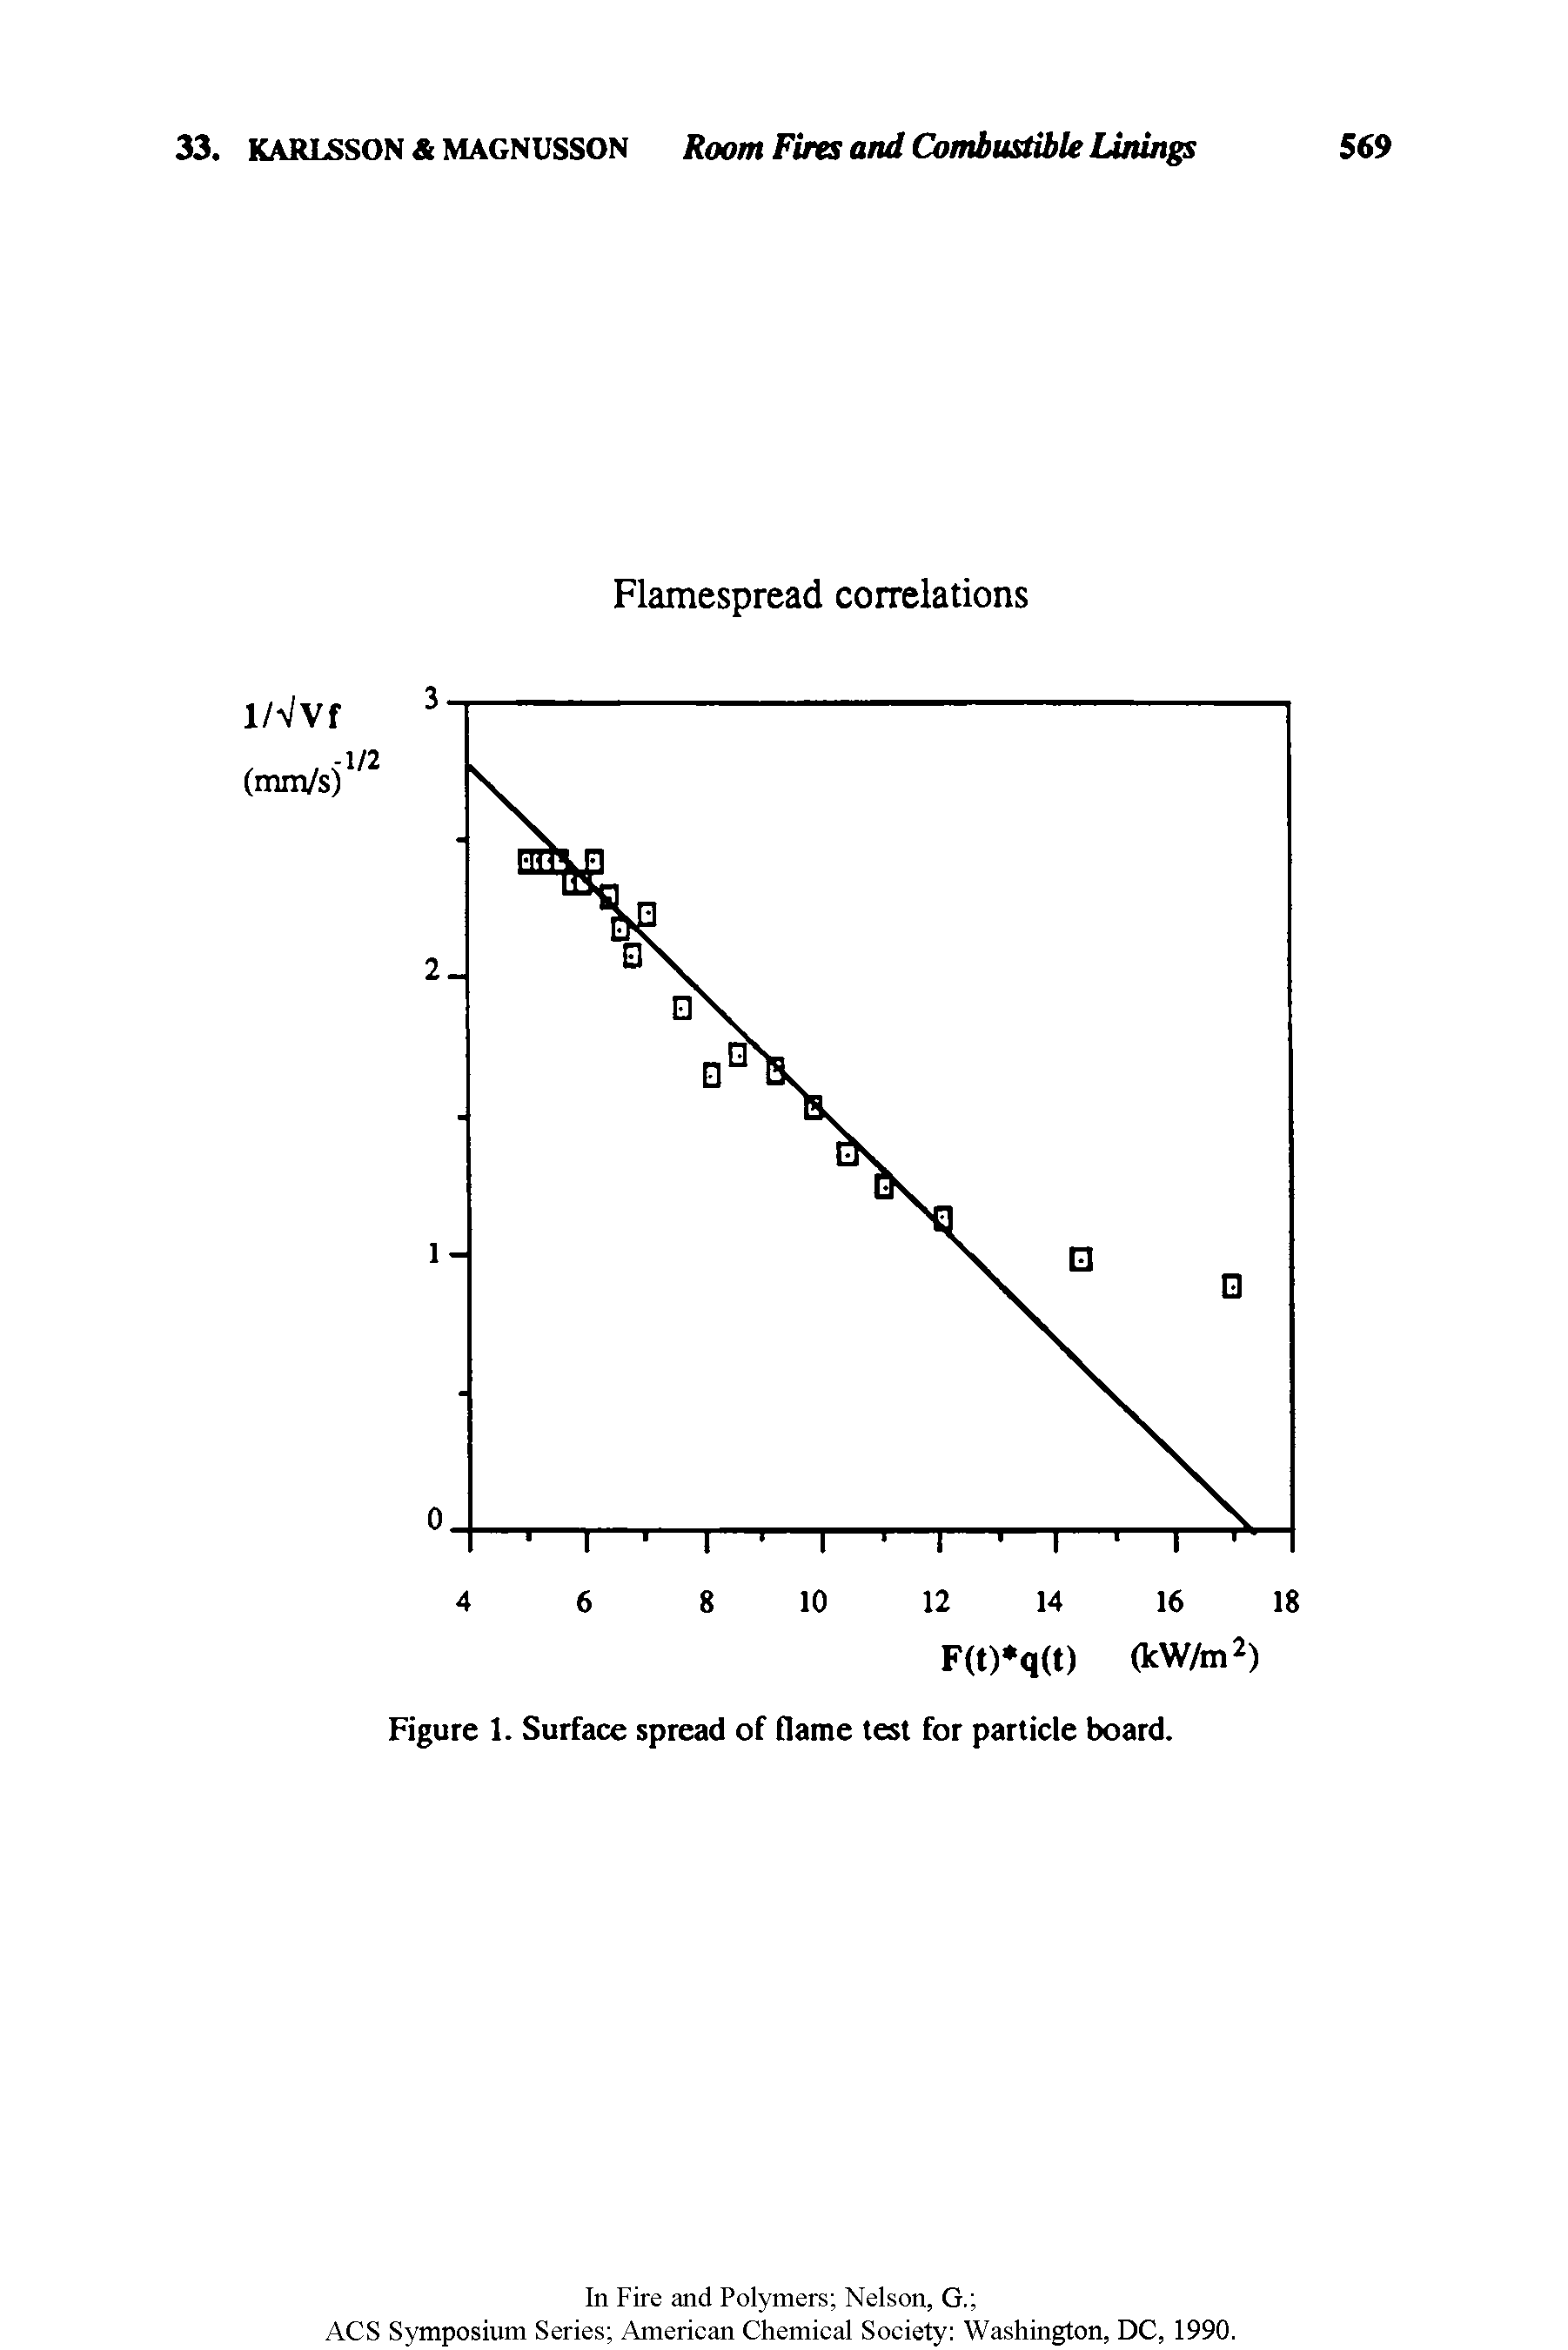 Figure 1. Surface spread of flame test for particle board.